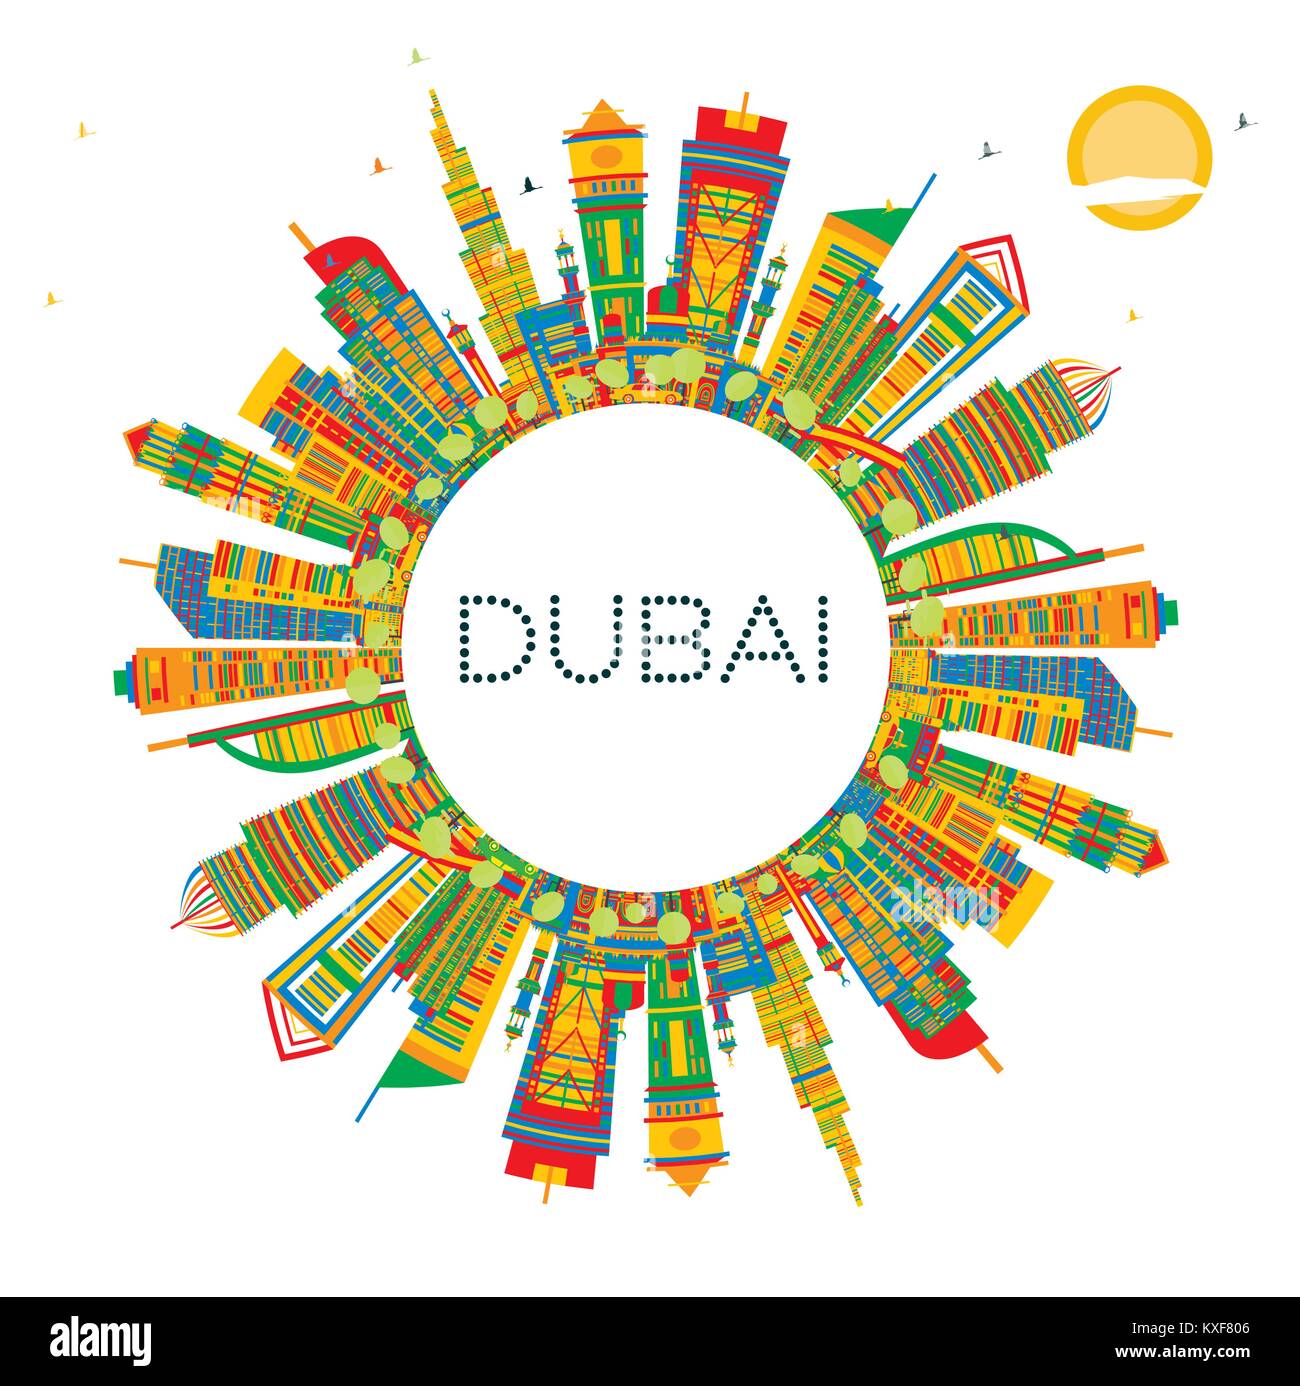 Dubai UAE City Skyline with Color Buildings and Copy Space. Vector Illustration. Business Travel and Tourism Illustration with Modern Architecture. Stock Vector